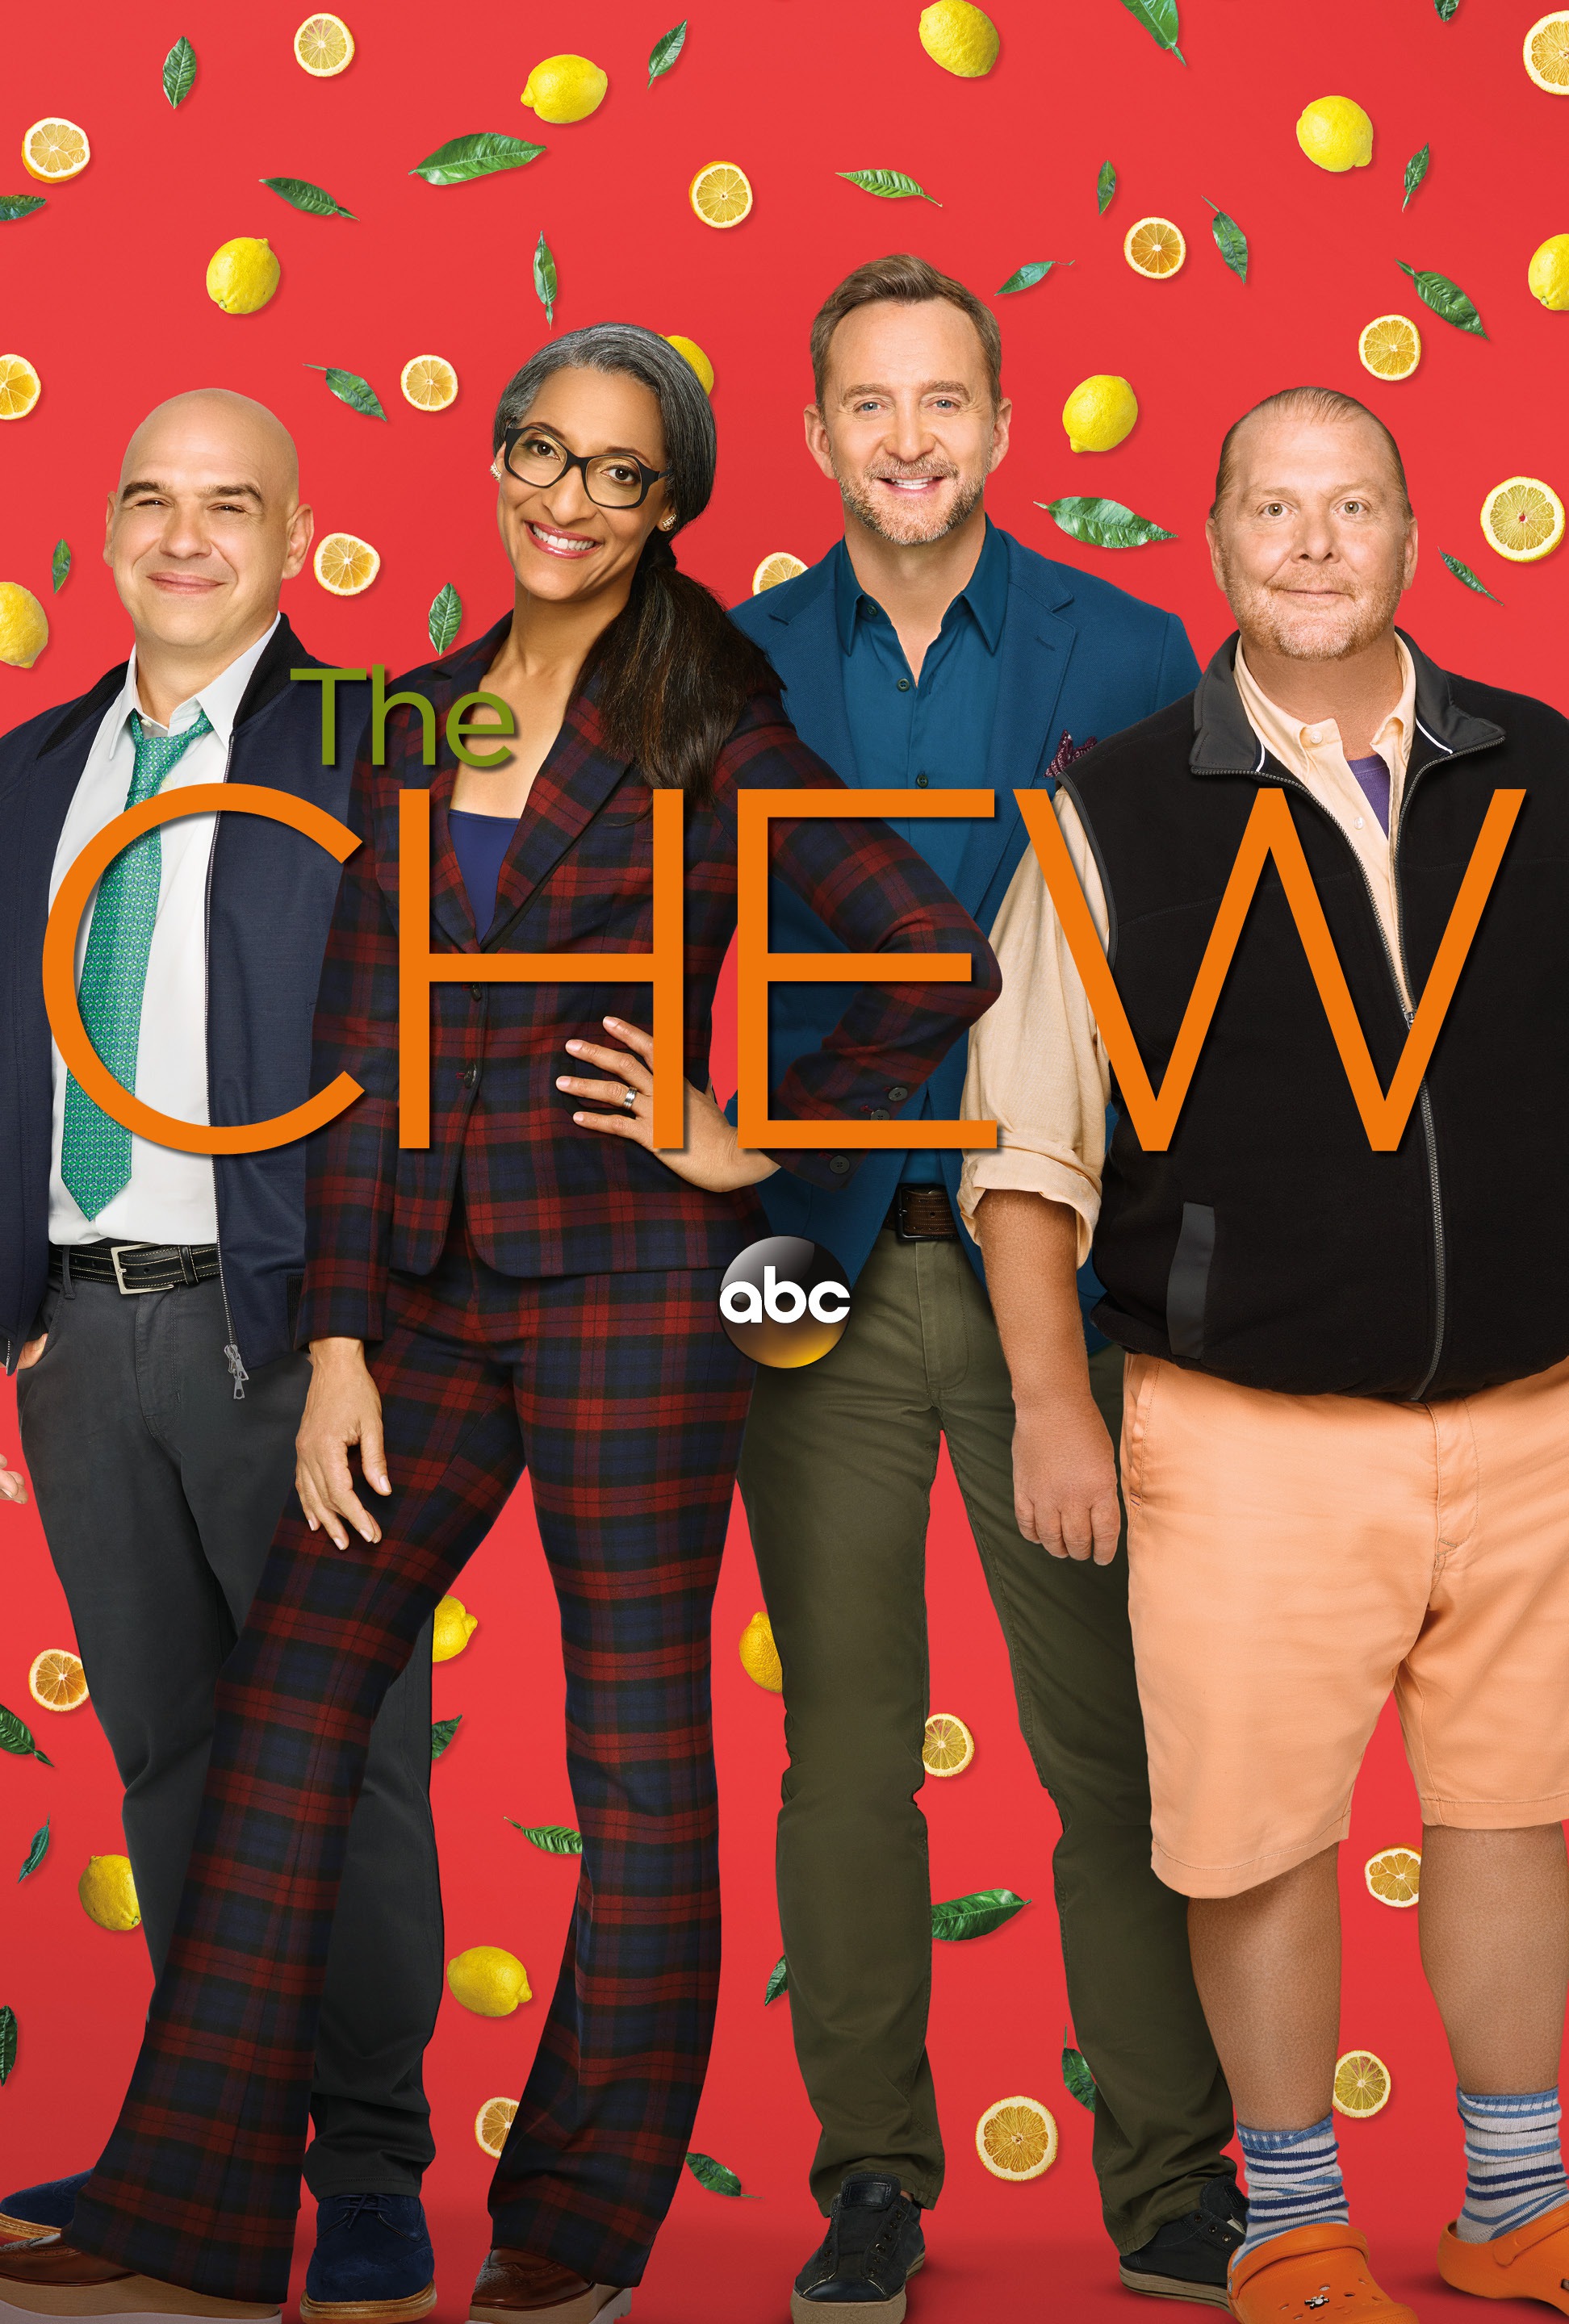 Mega Sized TV Poster Image for The Chew (#7 of 11)